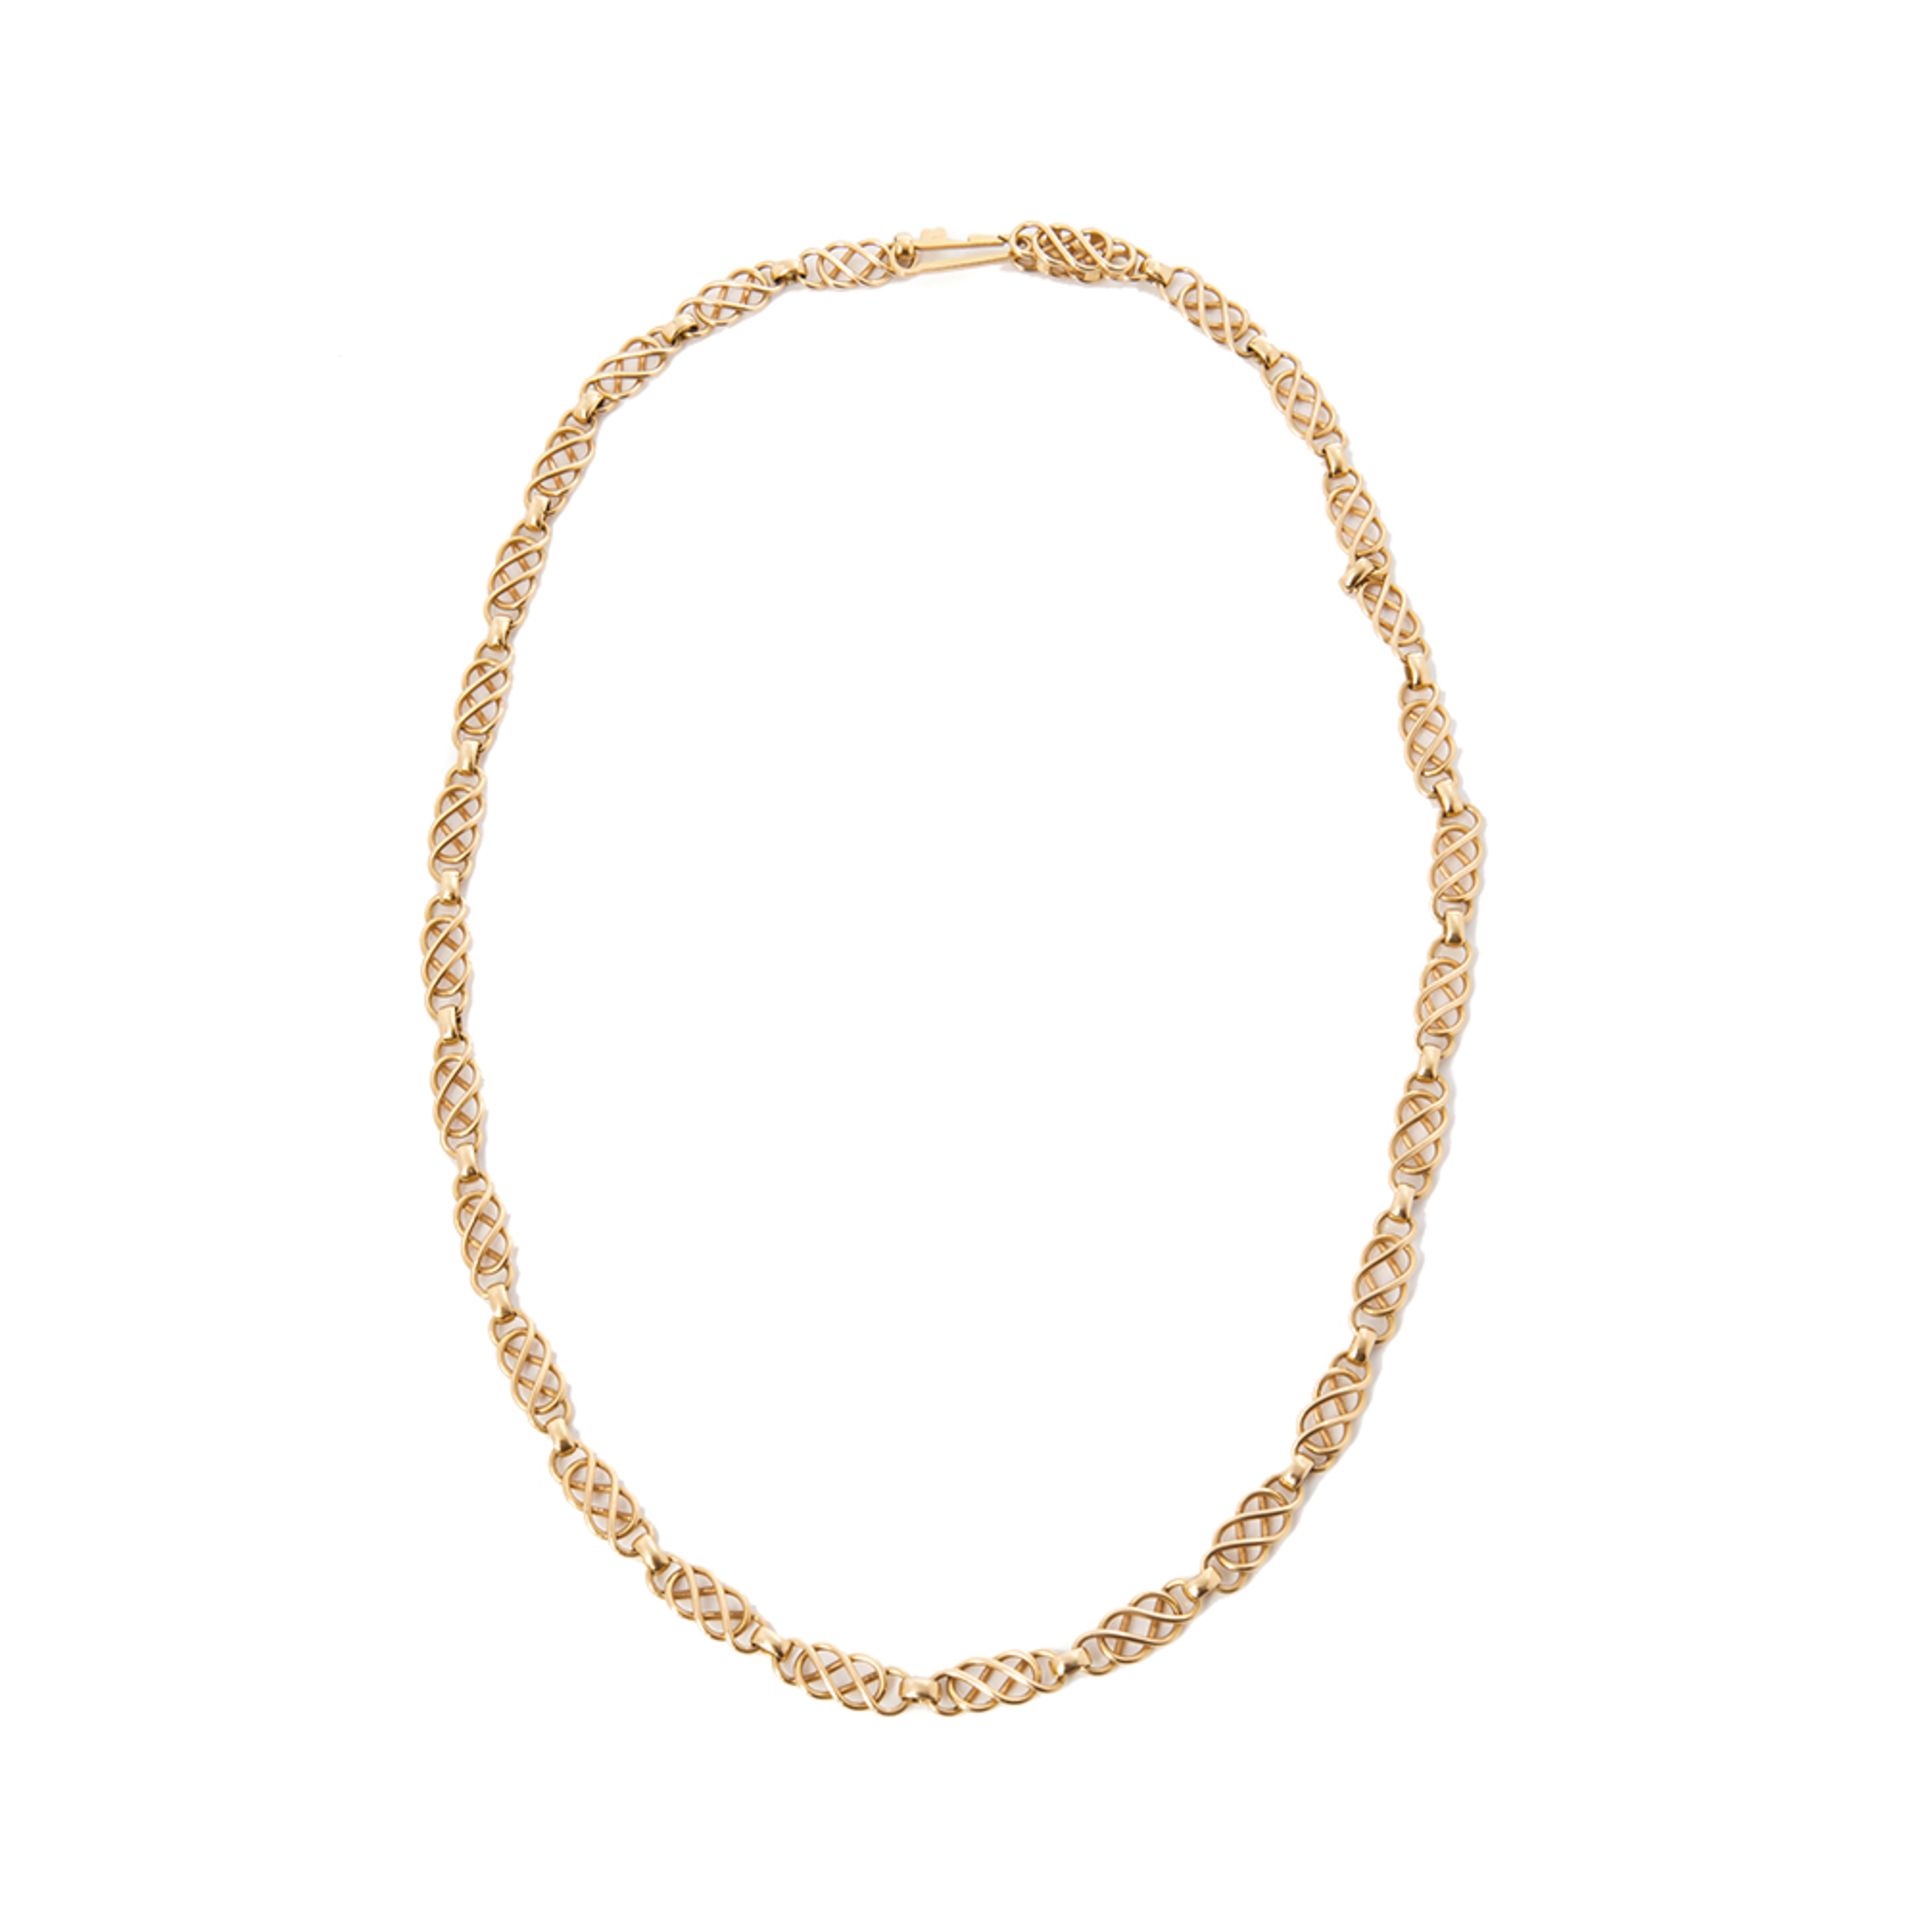 Georg Jensen 18k Yellow Gold Chain Vintage Necklace - Image 7 of 7